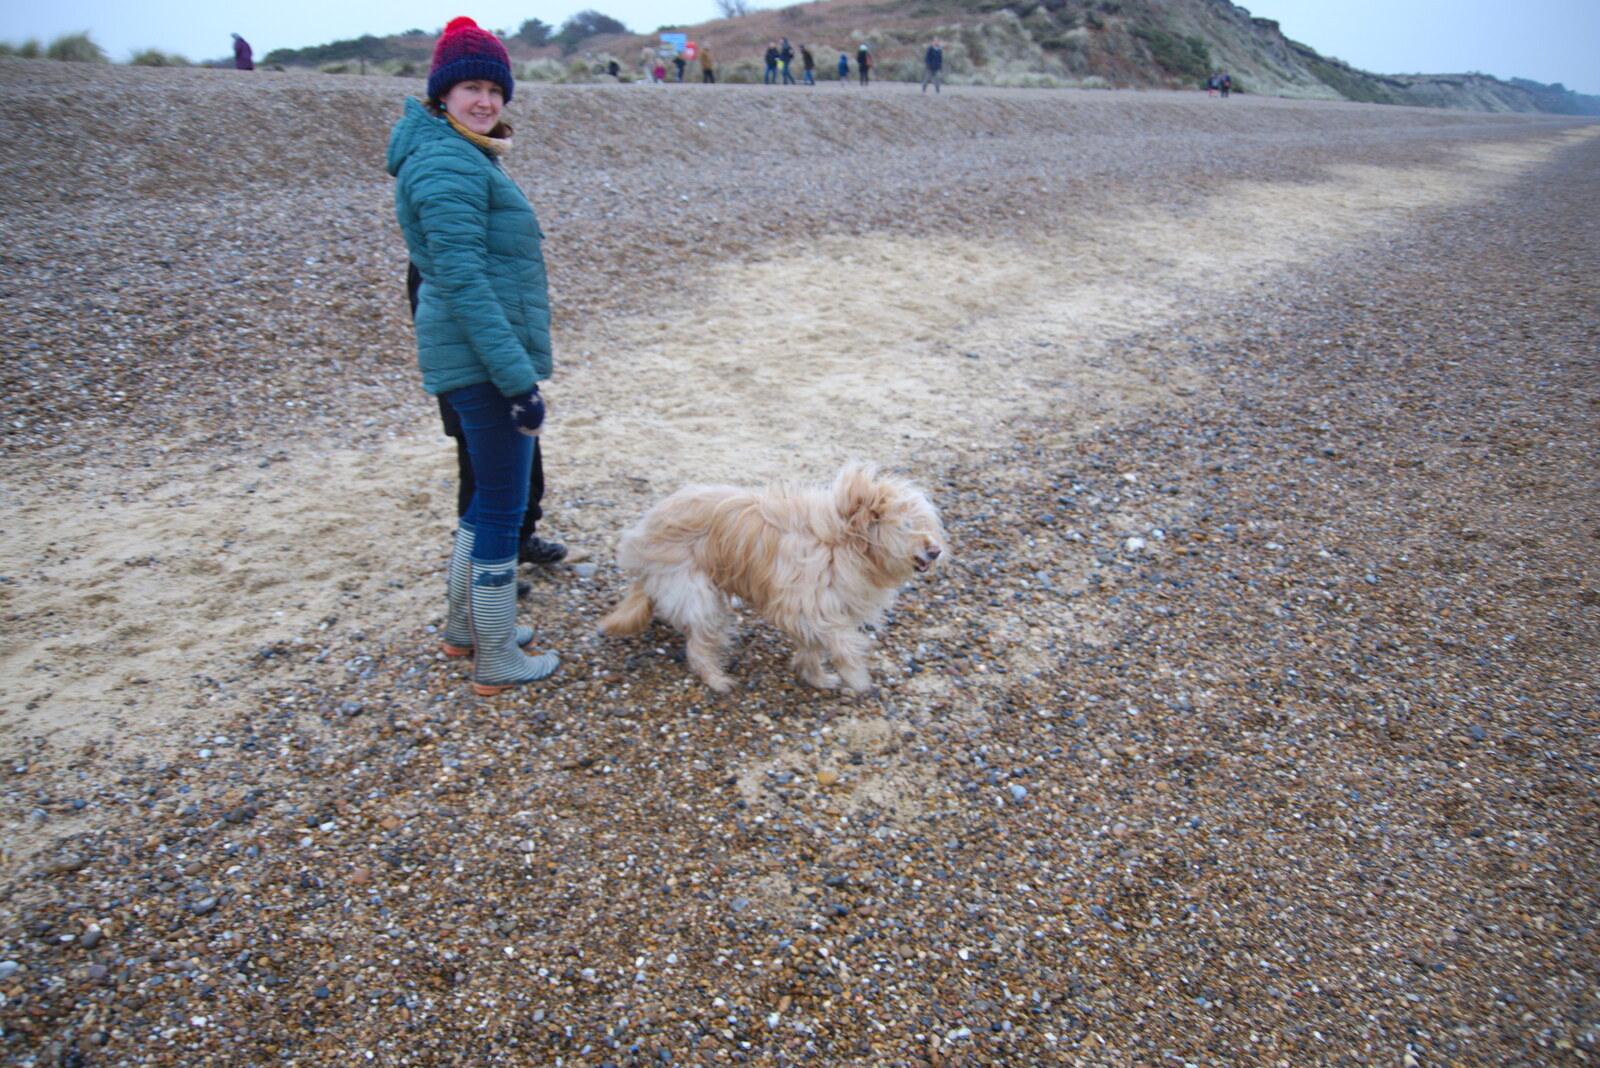 Isobel meets a hairy dog from A Trip to the Beach, Dunwich Heath, Suffolk - 27th December 2019